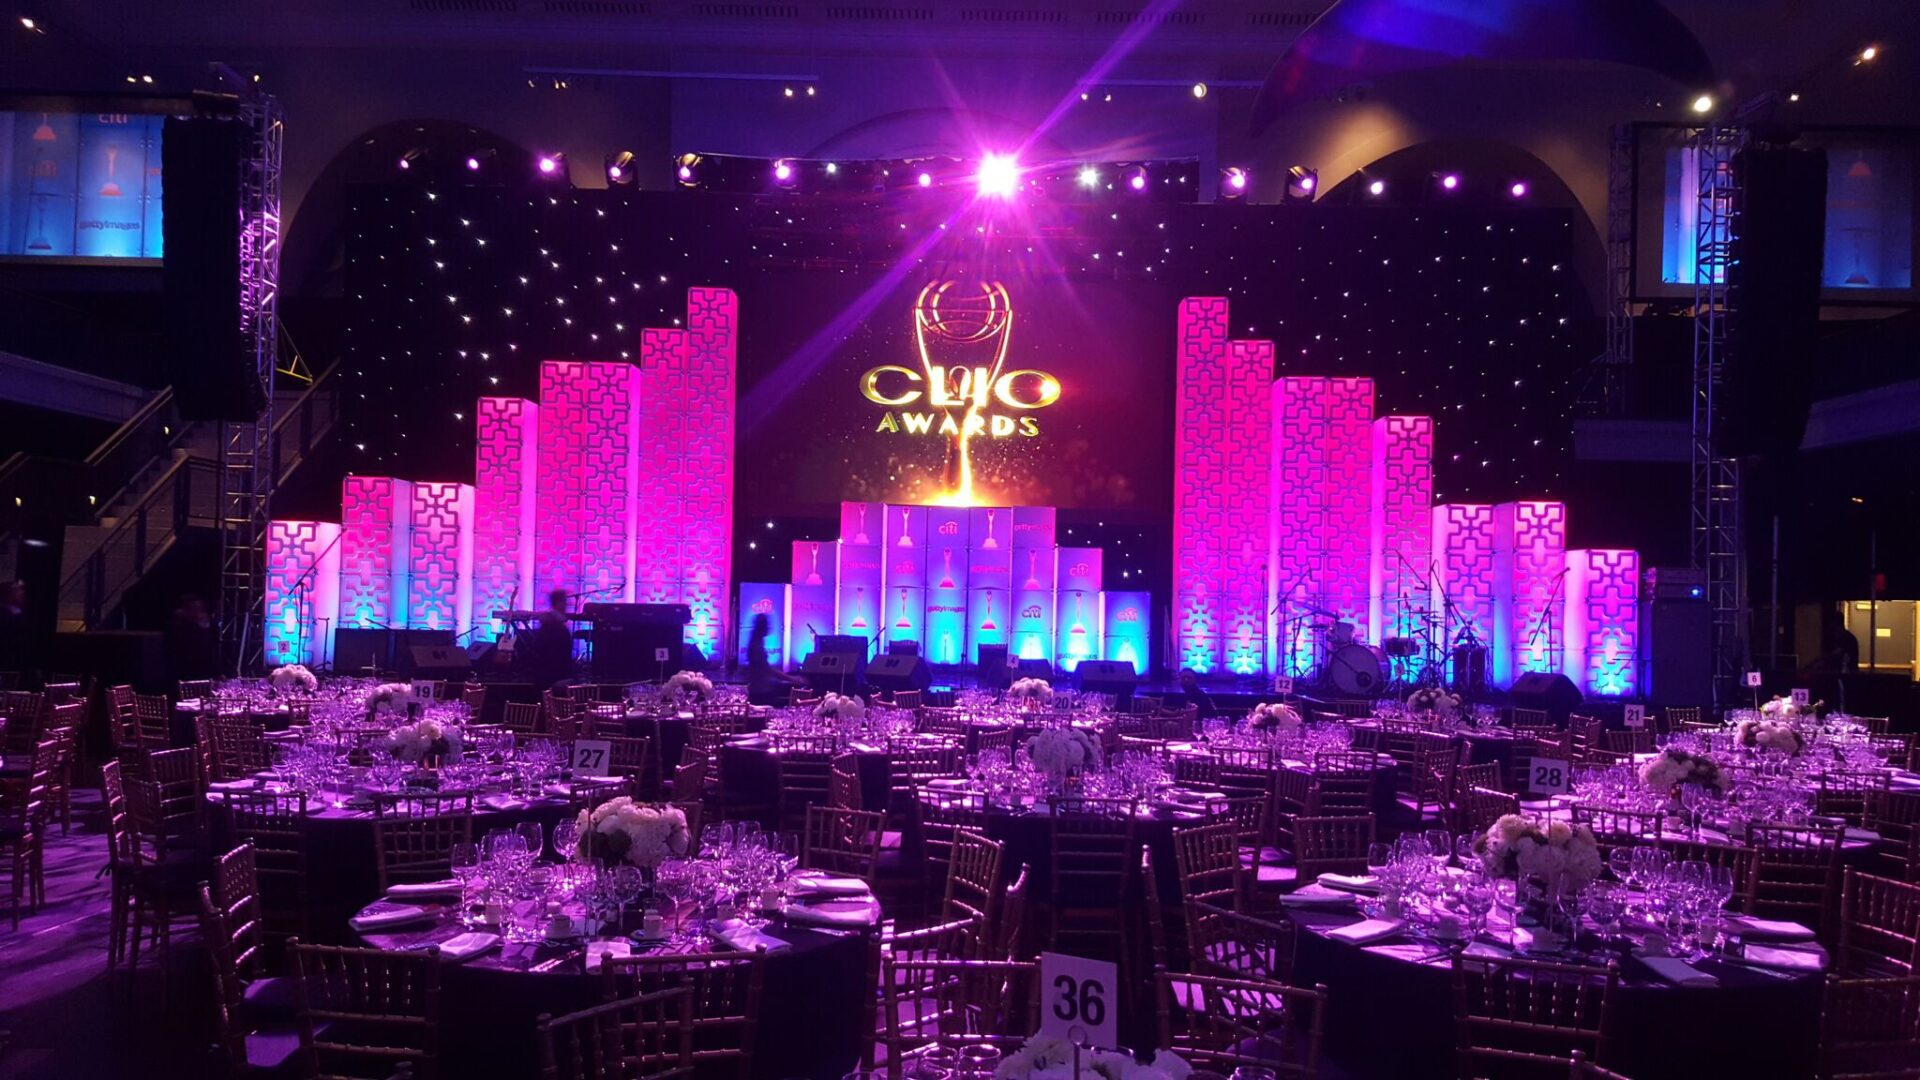 A stage set up for the omo awards.